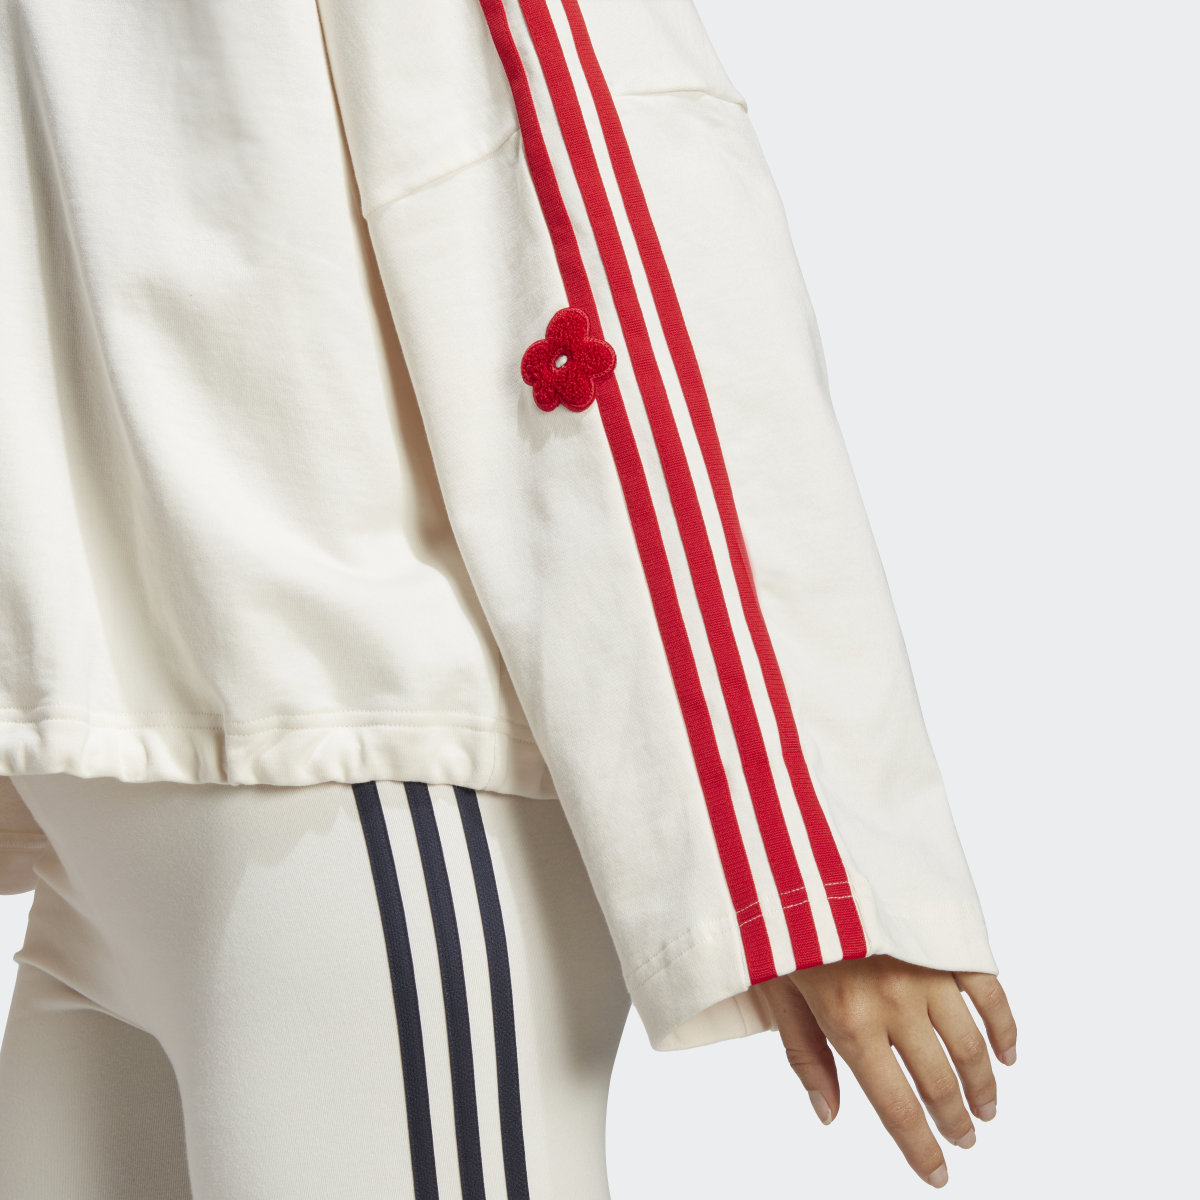 Adidas 3-Stripes Sweatshirt with Chenille Flower Patches. 6